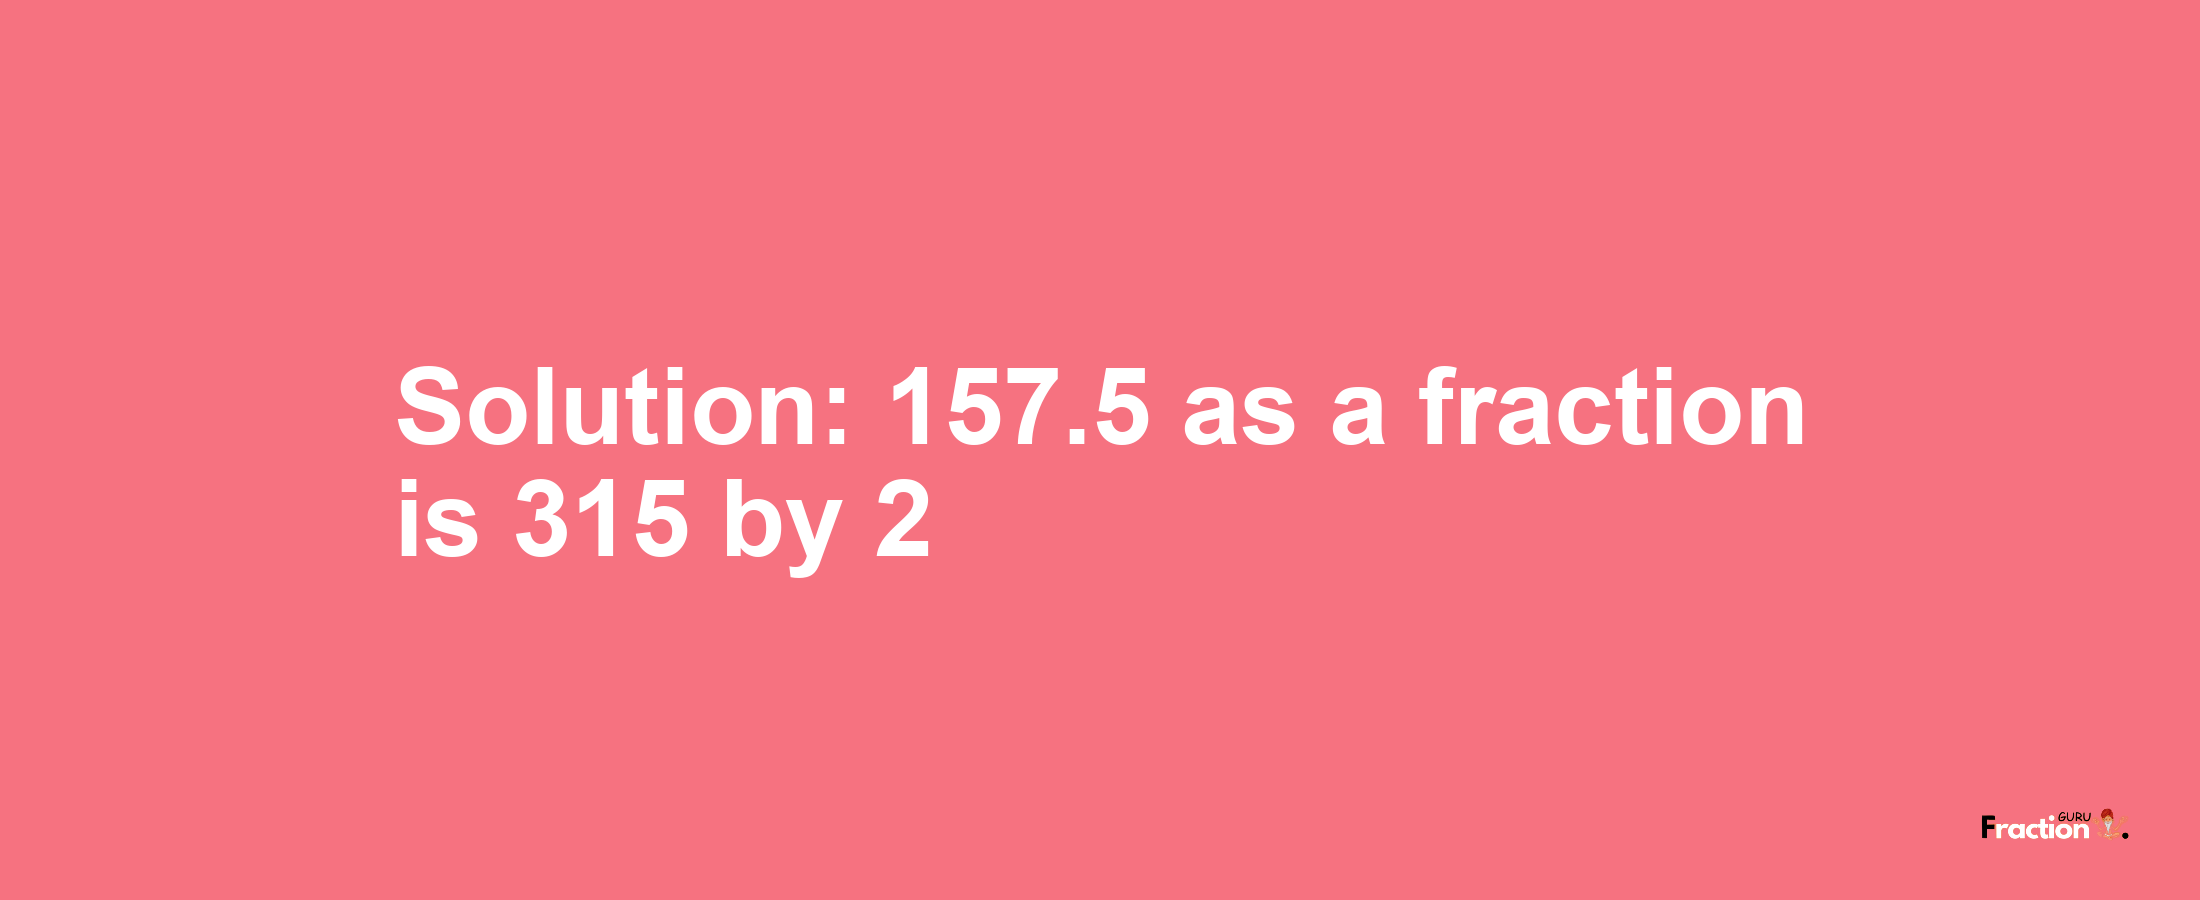 Solution:157.5 as a fraction is 315/2